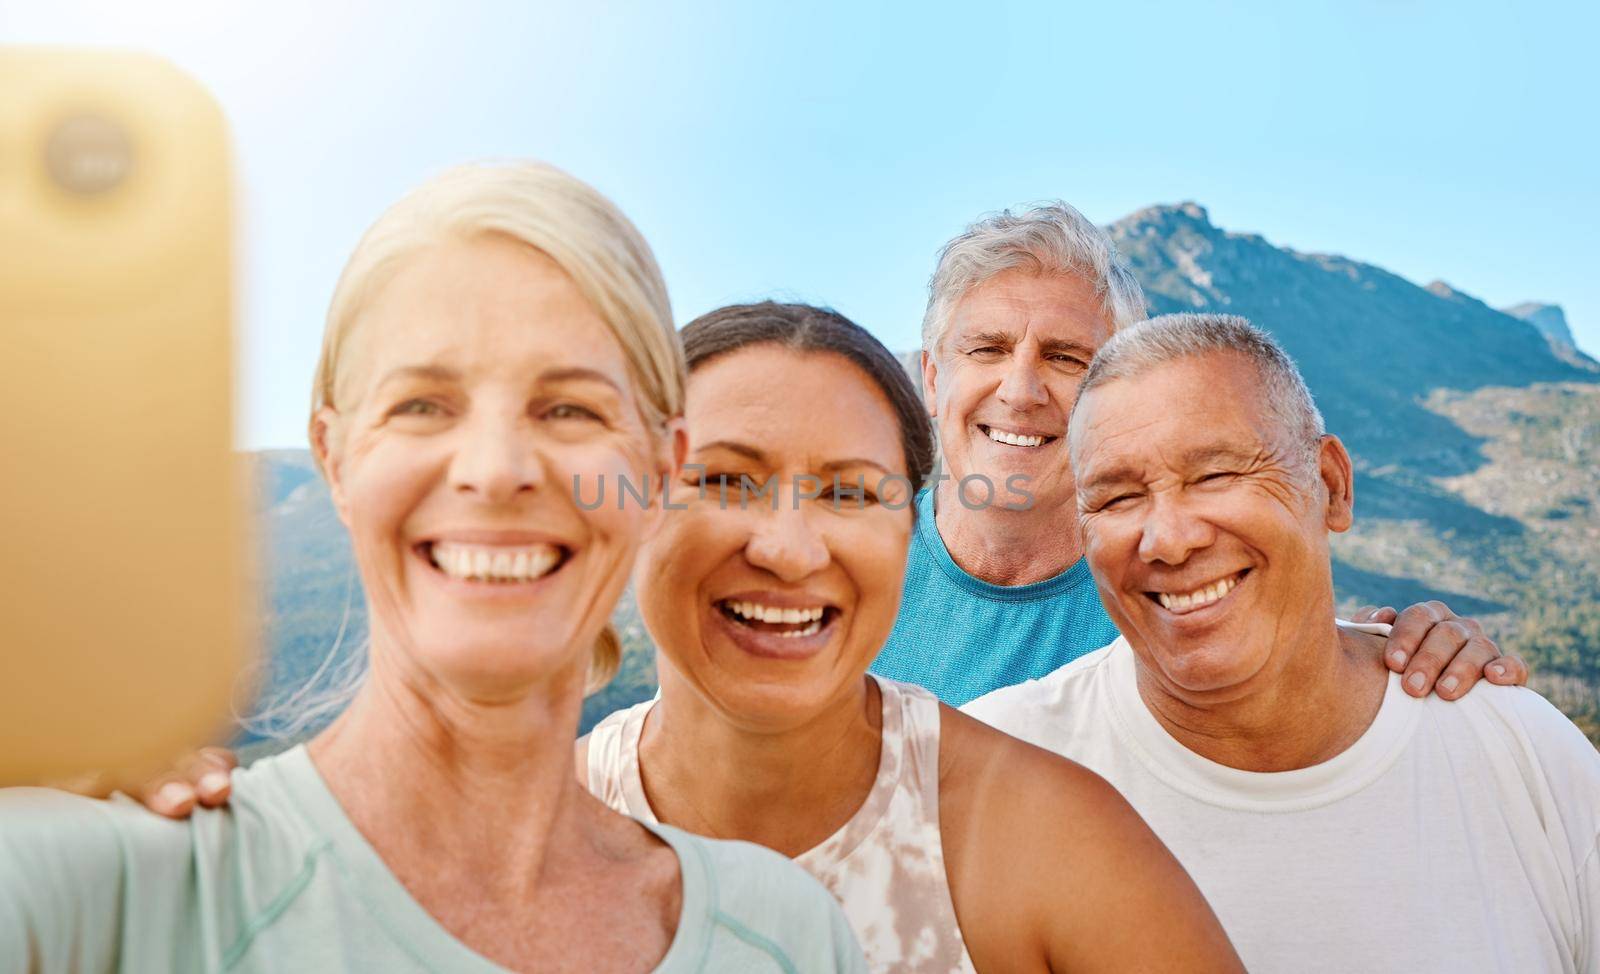 Group of active seniors posing together for a selfie or video call on a sunny day against a mountain view background. Happy retirees exercising together outdoors. Living healthy and active lifestyles by YuriArcurs